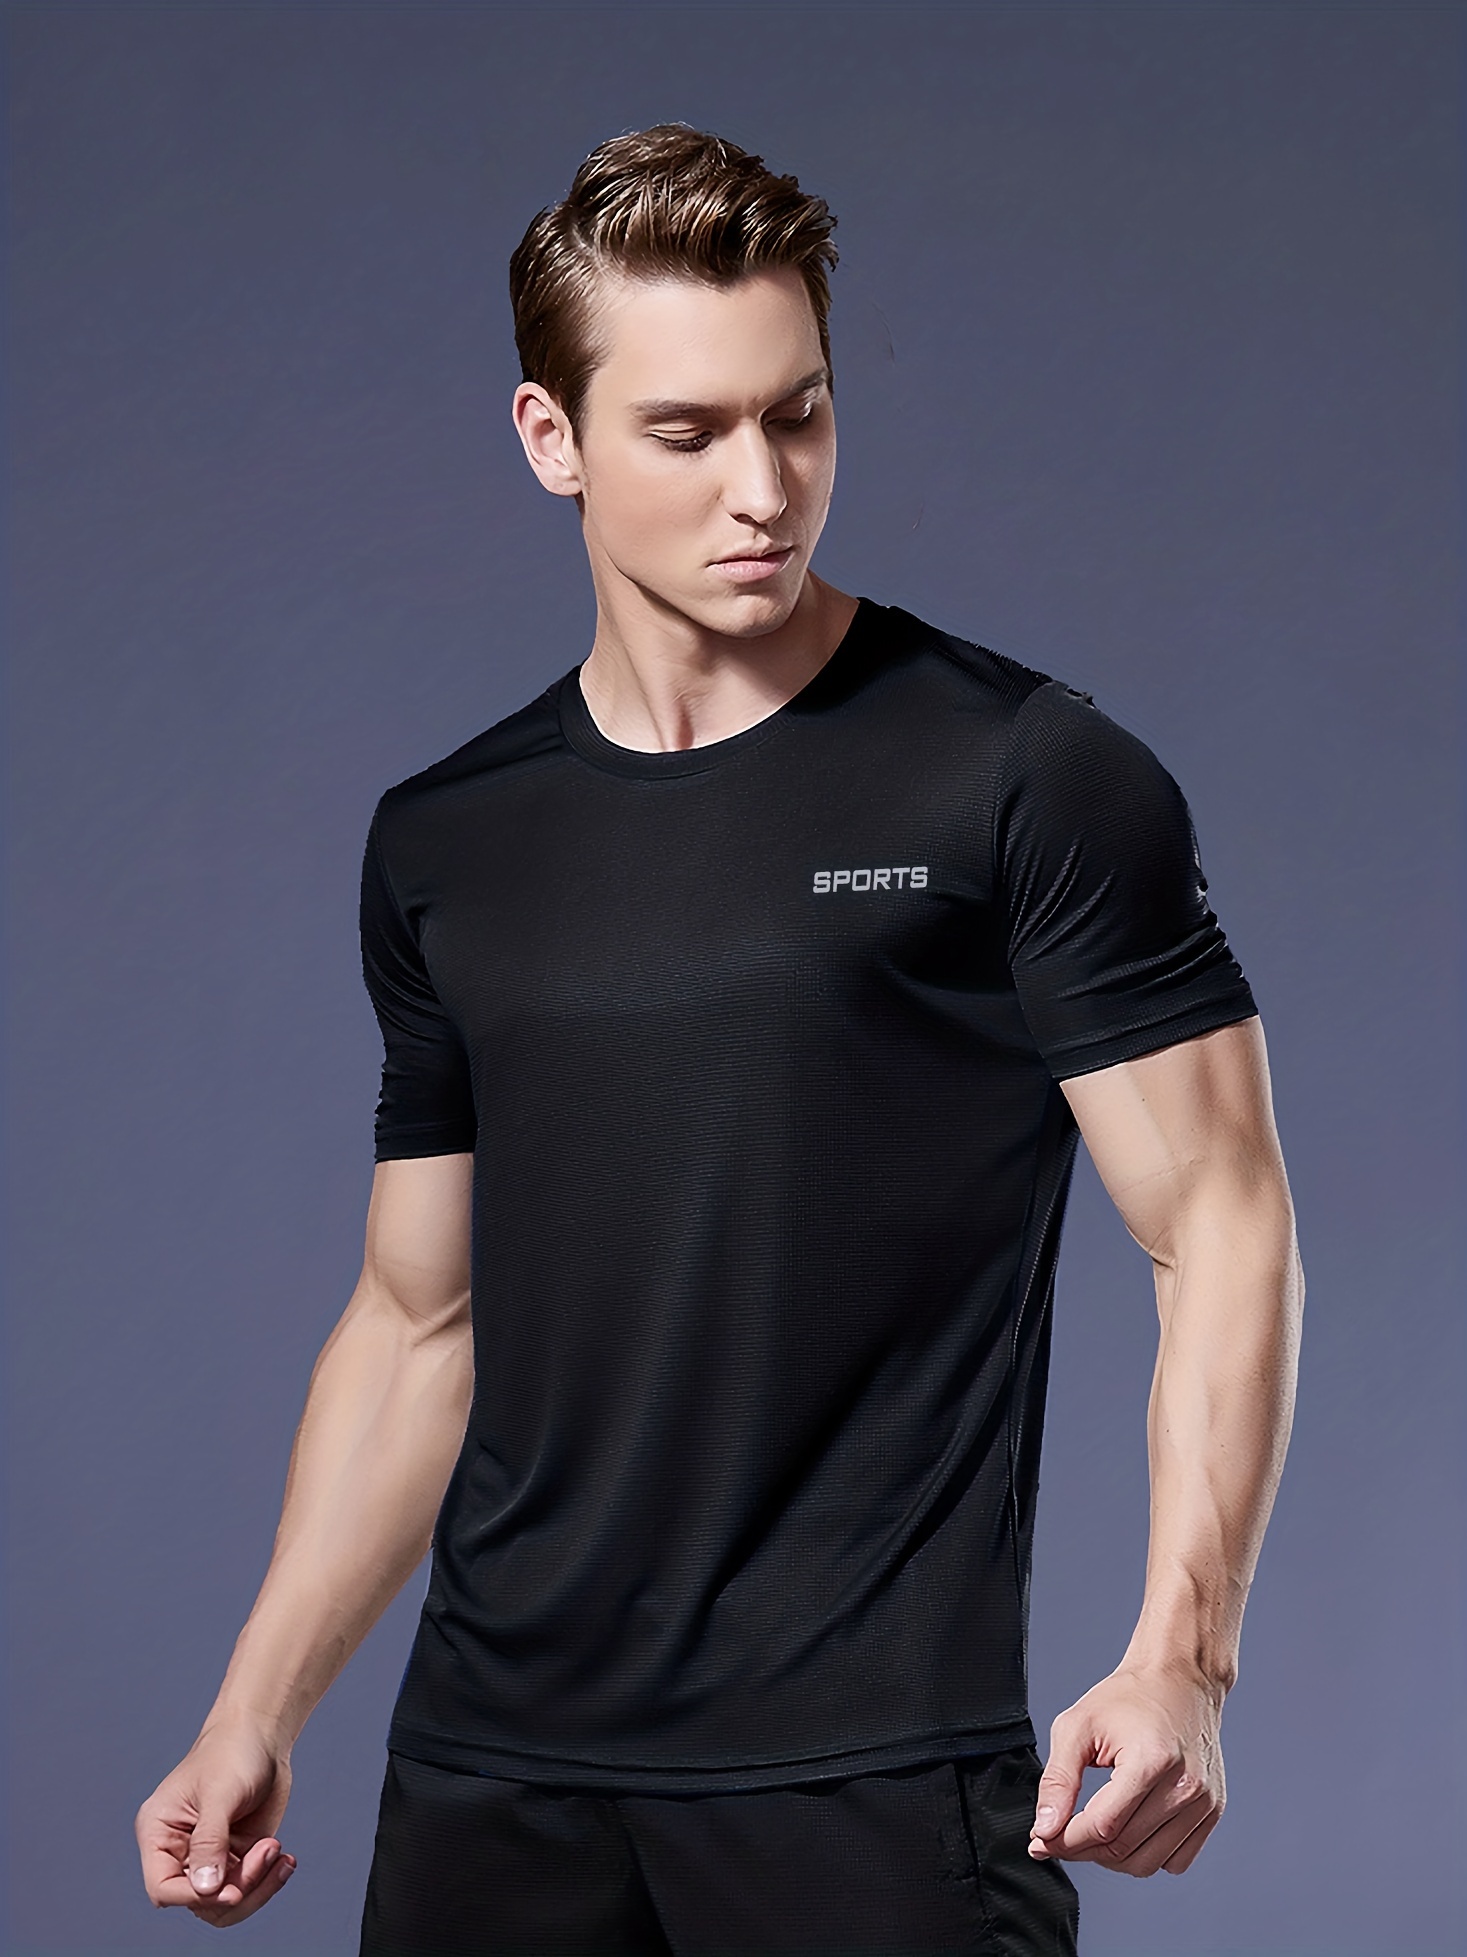 Quick Dry Four Way Stretch T-Shirt Sports Top Exercise Gradient Color Fit  Jogger Men Tech Shirts - China Quick Dry T Shirts and Four Way Stretch T  Shirts price